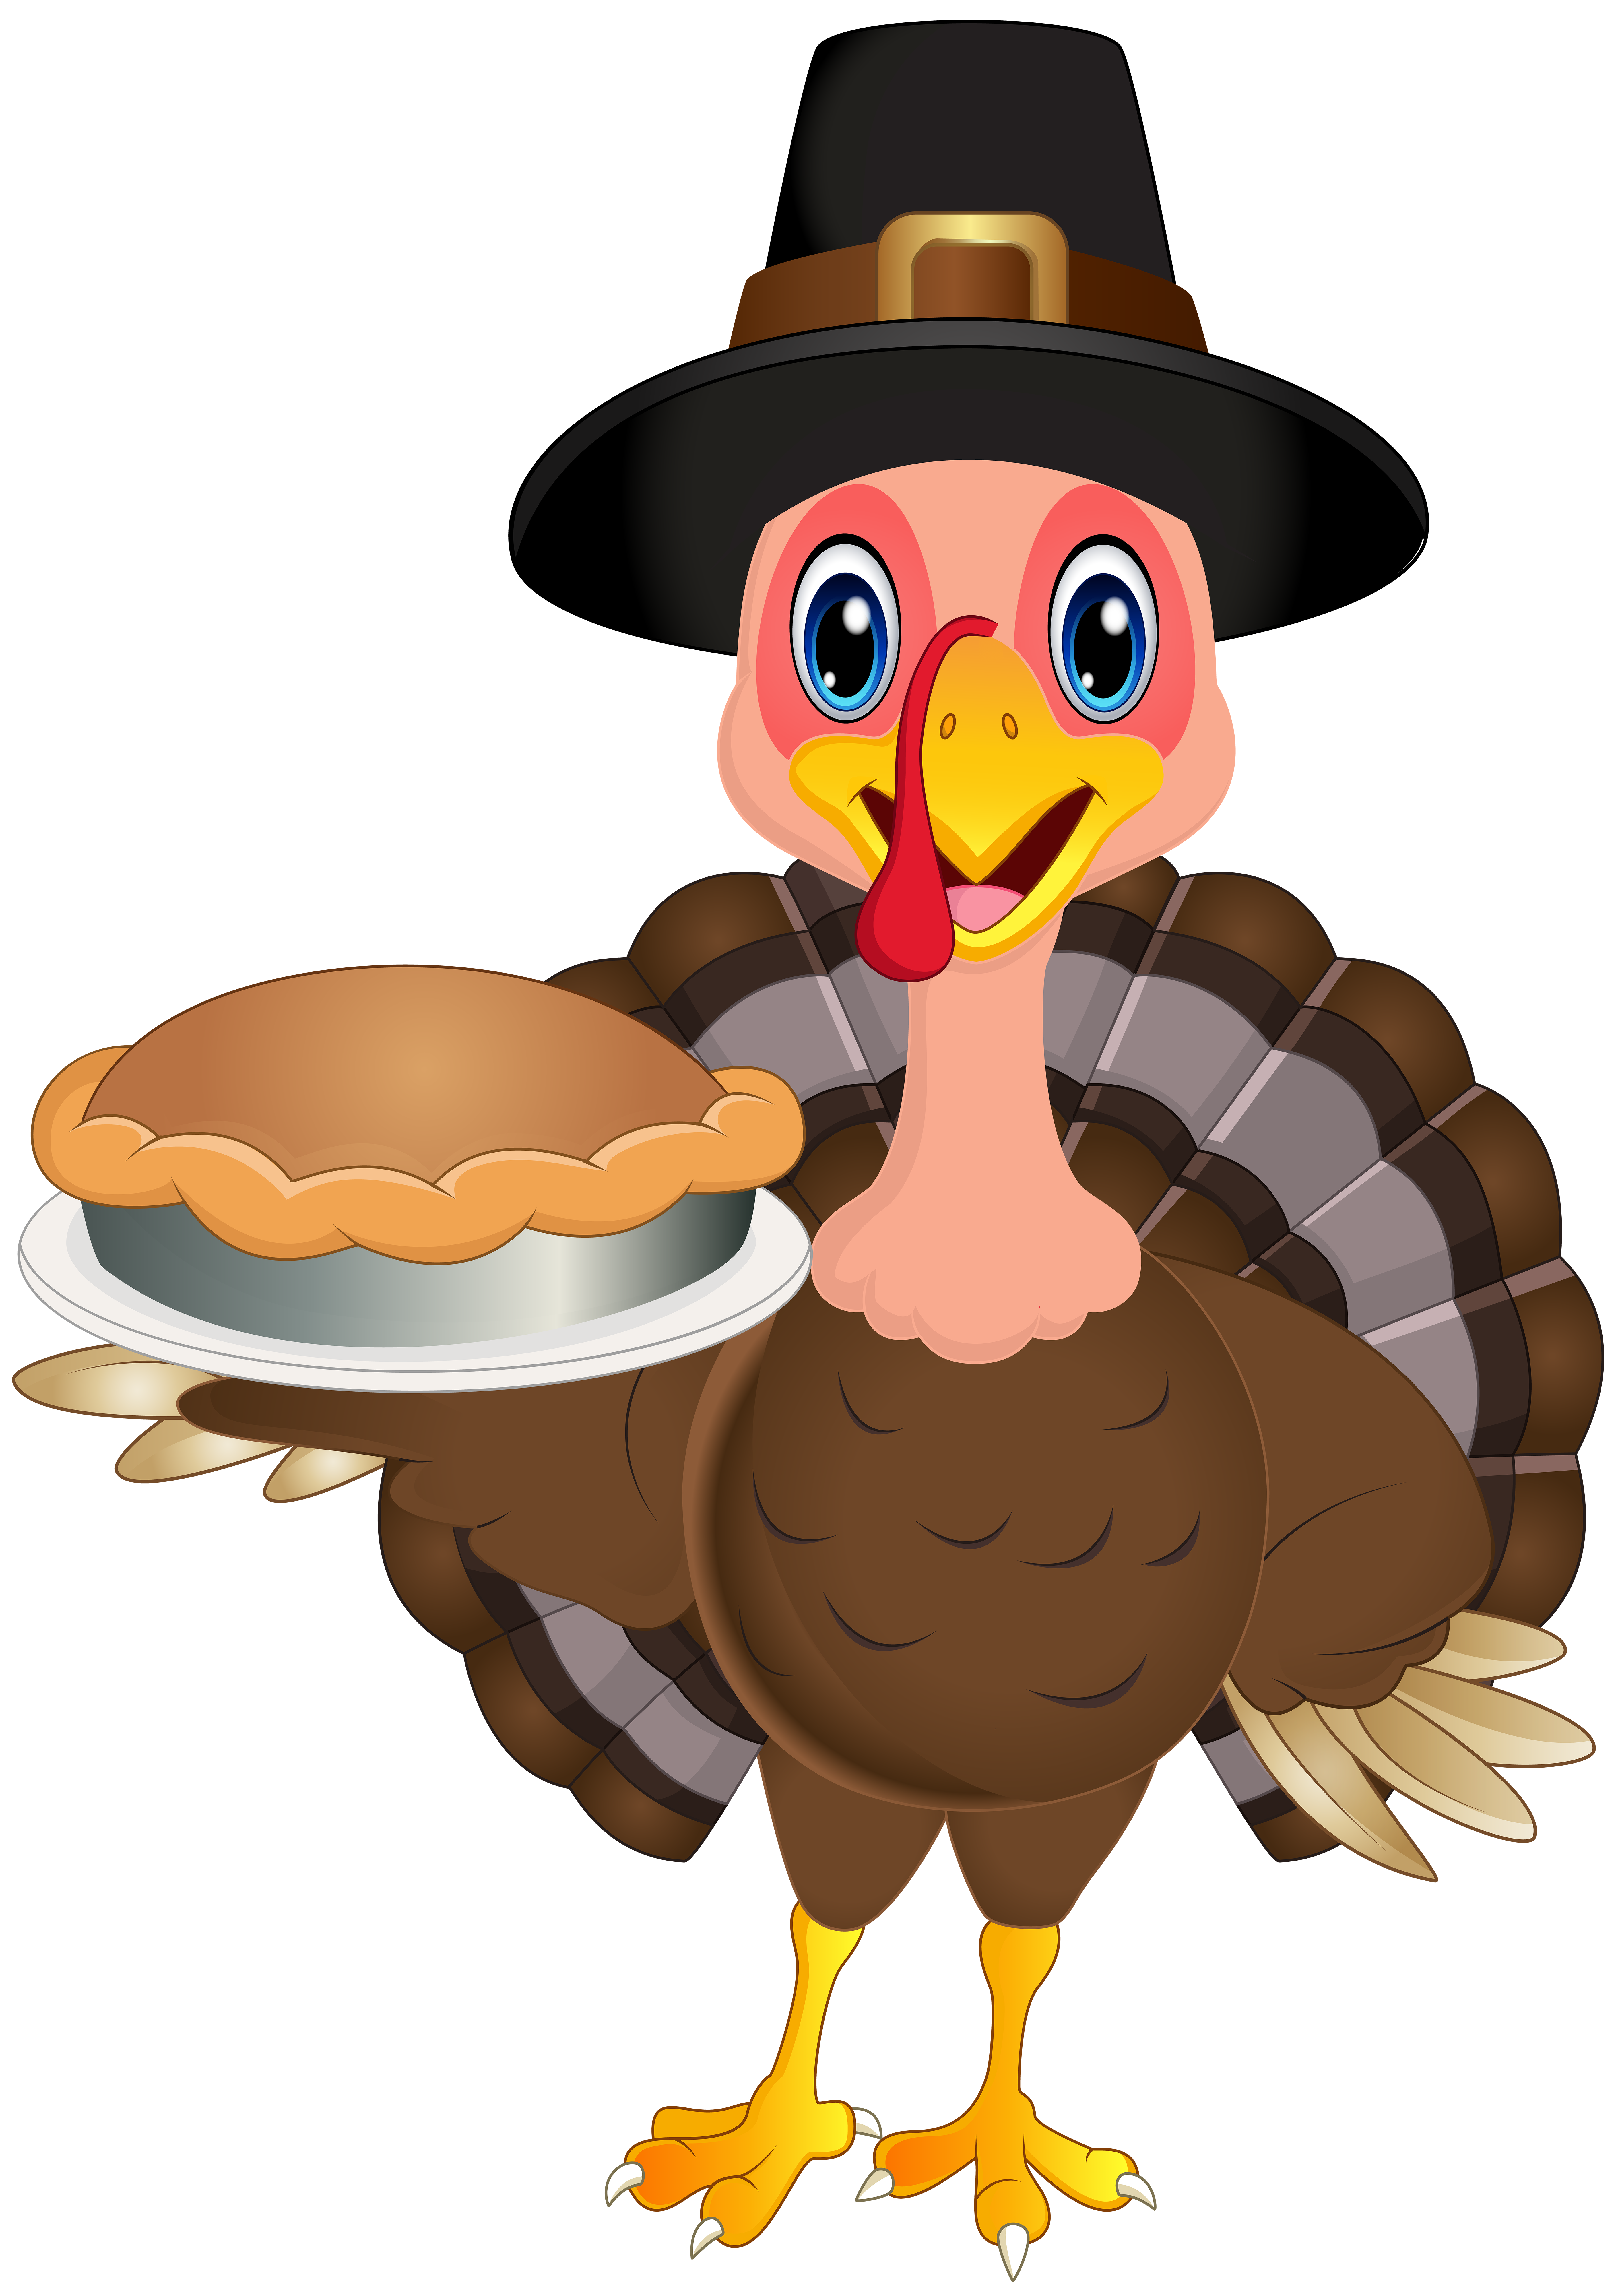 Thanksgiving Cute Turkey PNG Clip Art Image Quality Image And Transparent PNG Free Clipart